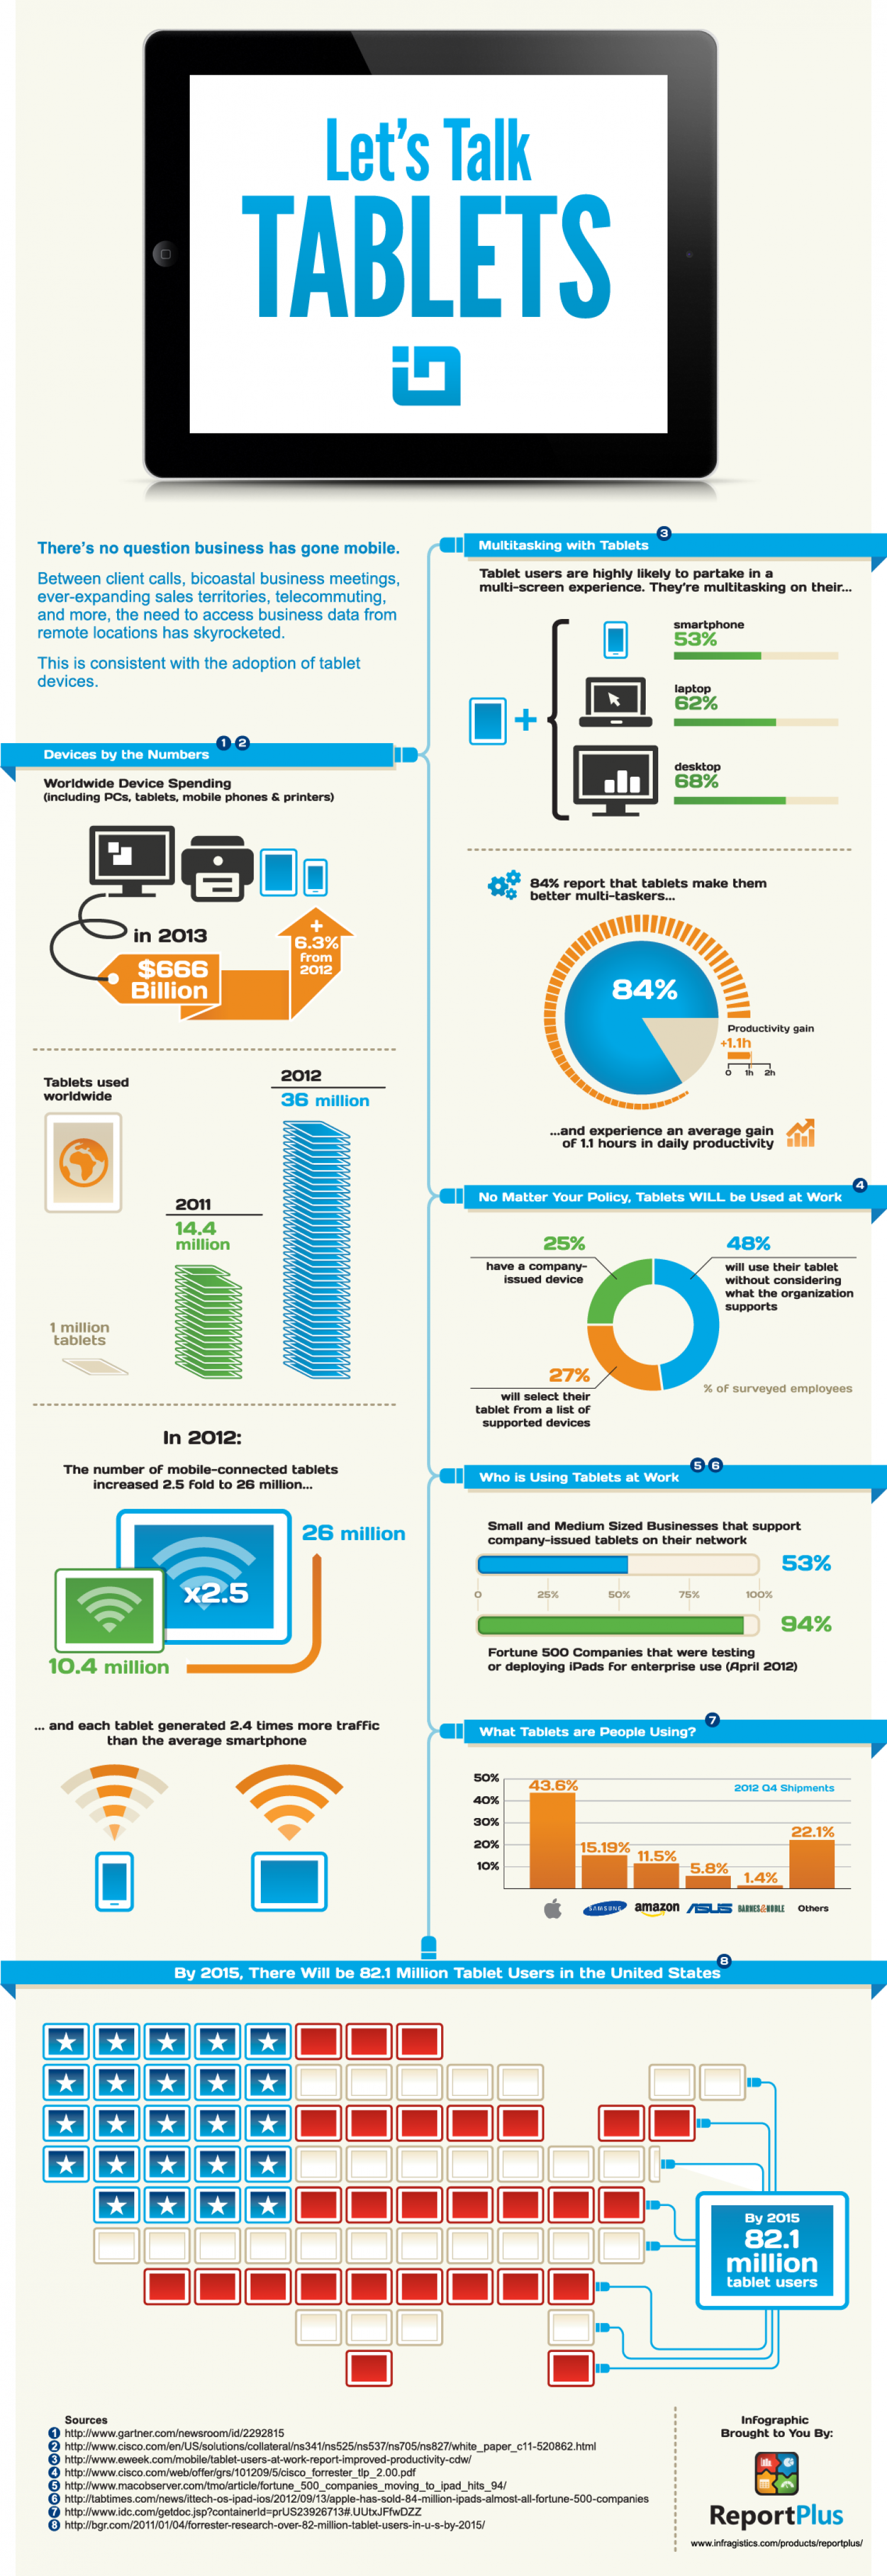 Let's Talk Tablets Infographic